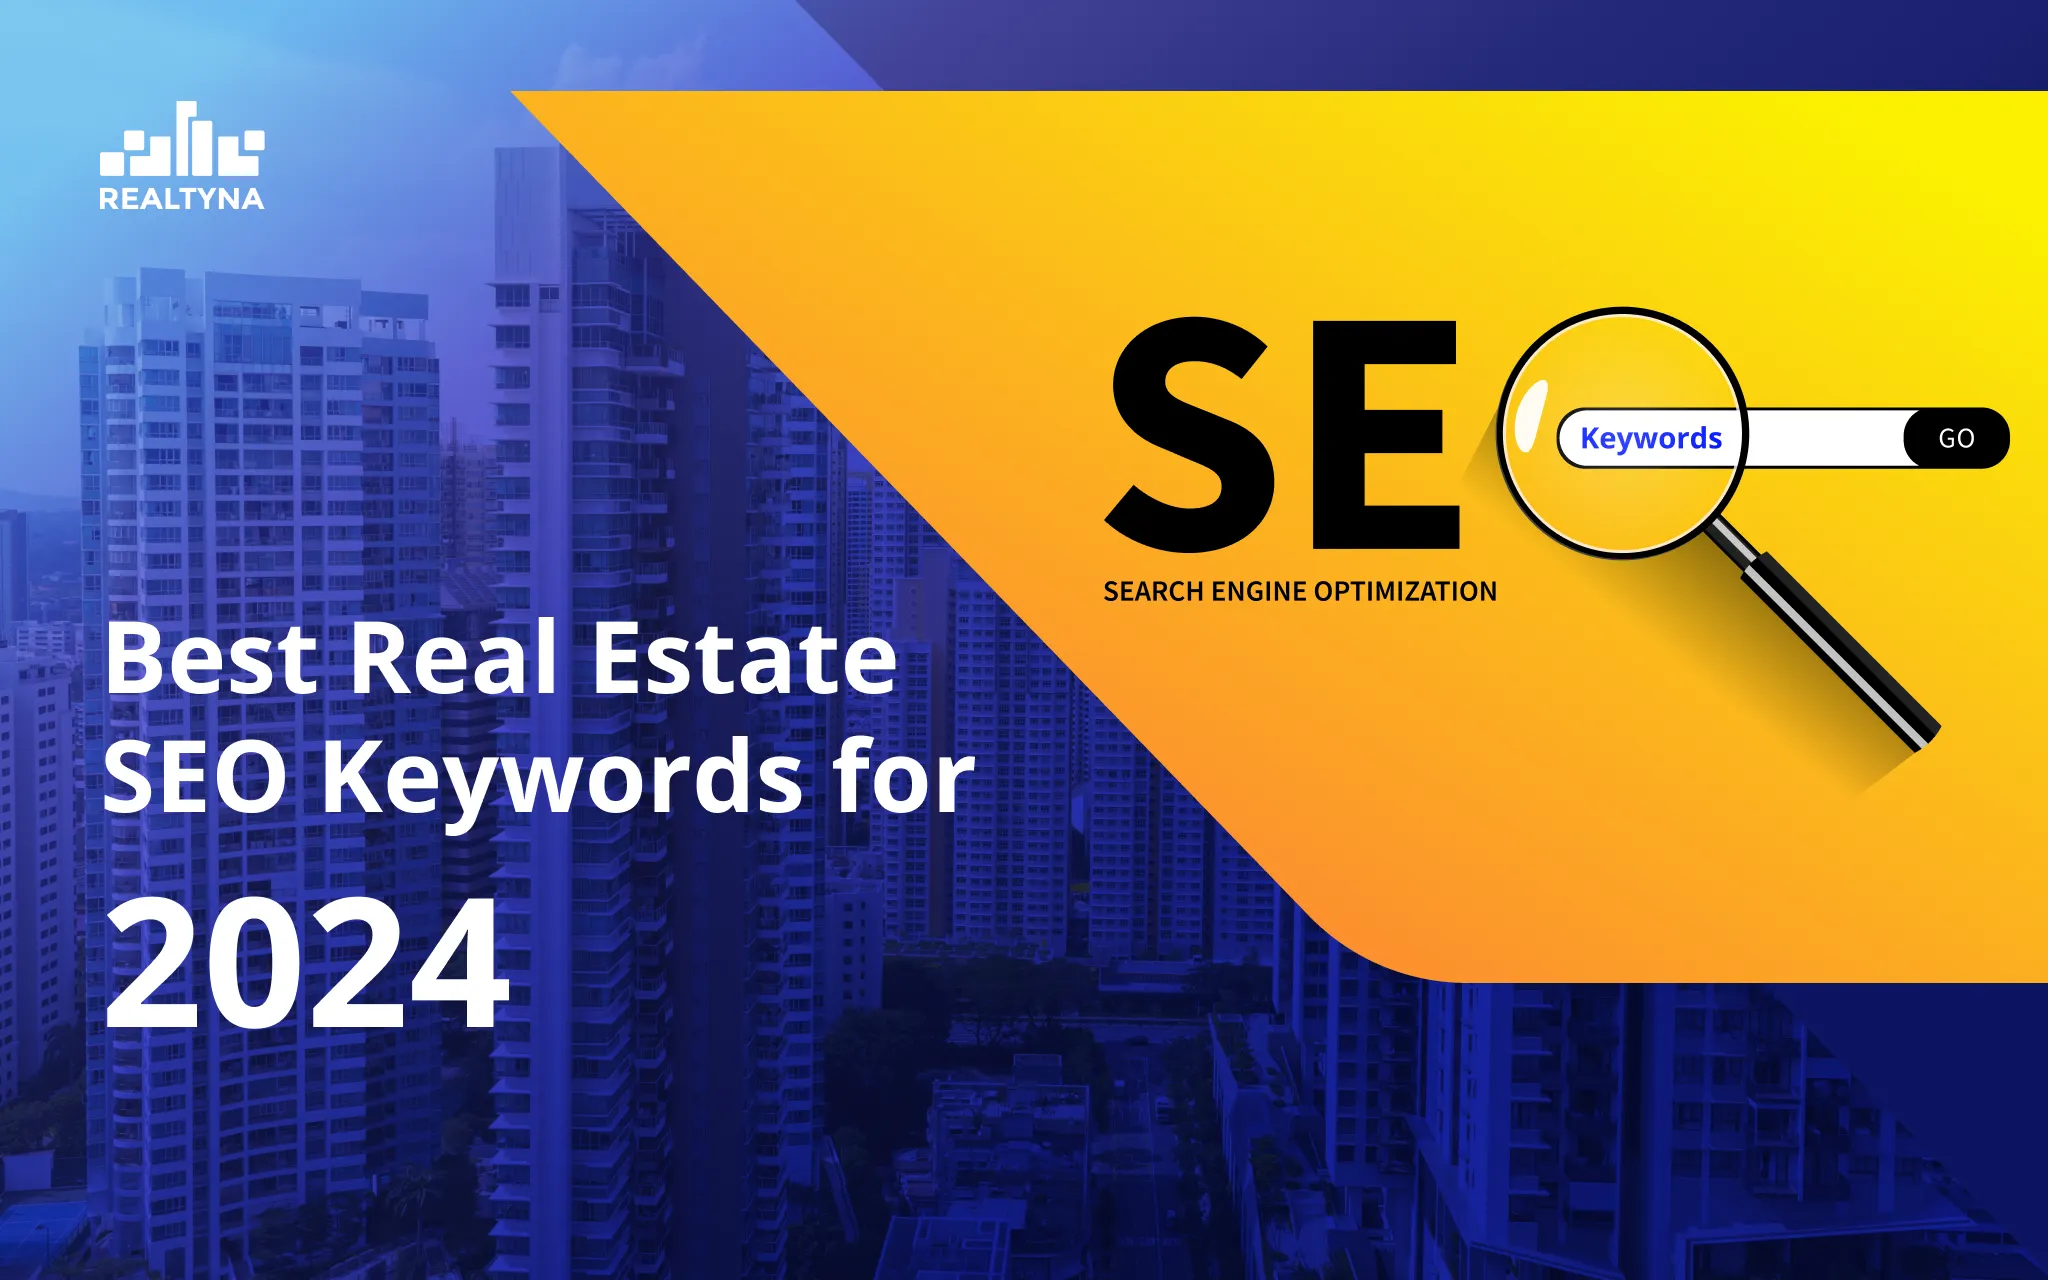 A Complete Guide to the Best Real Estate SEO Keywords for 2024